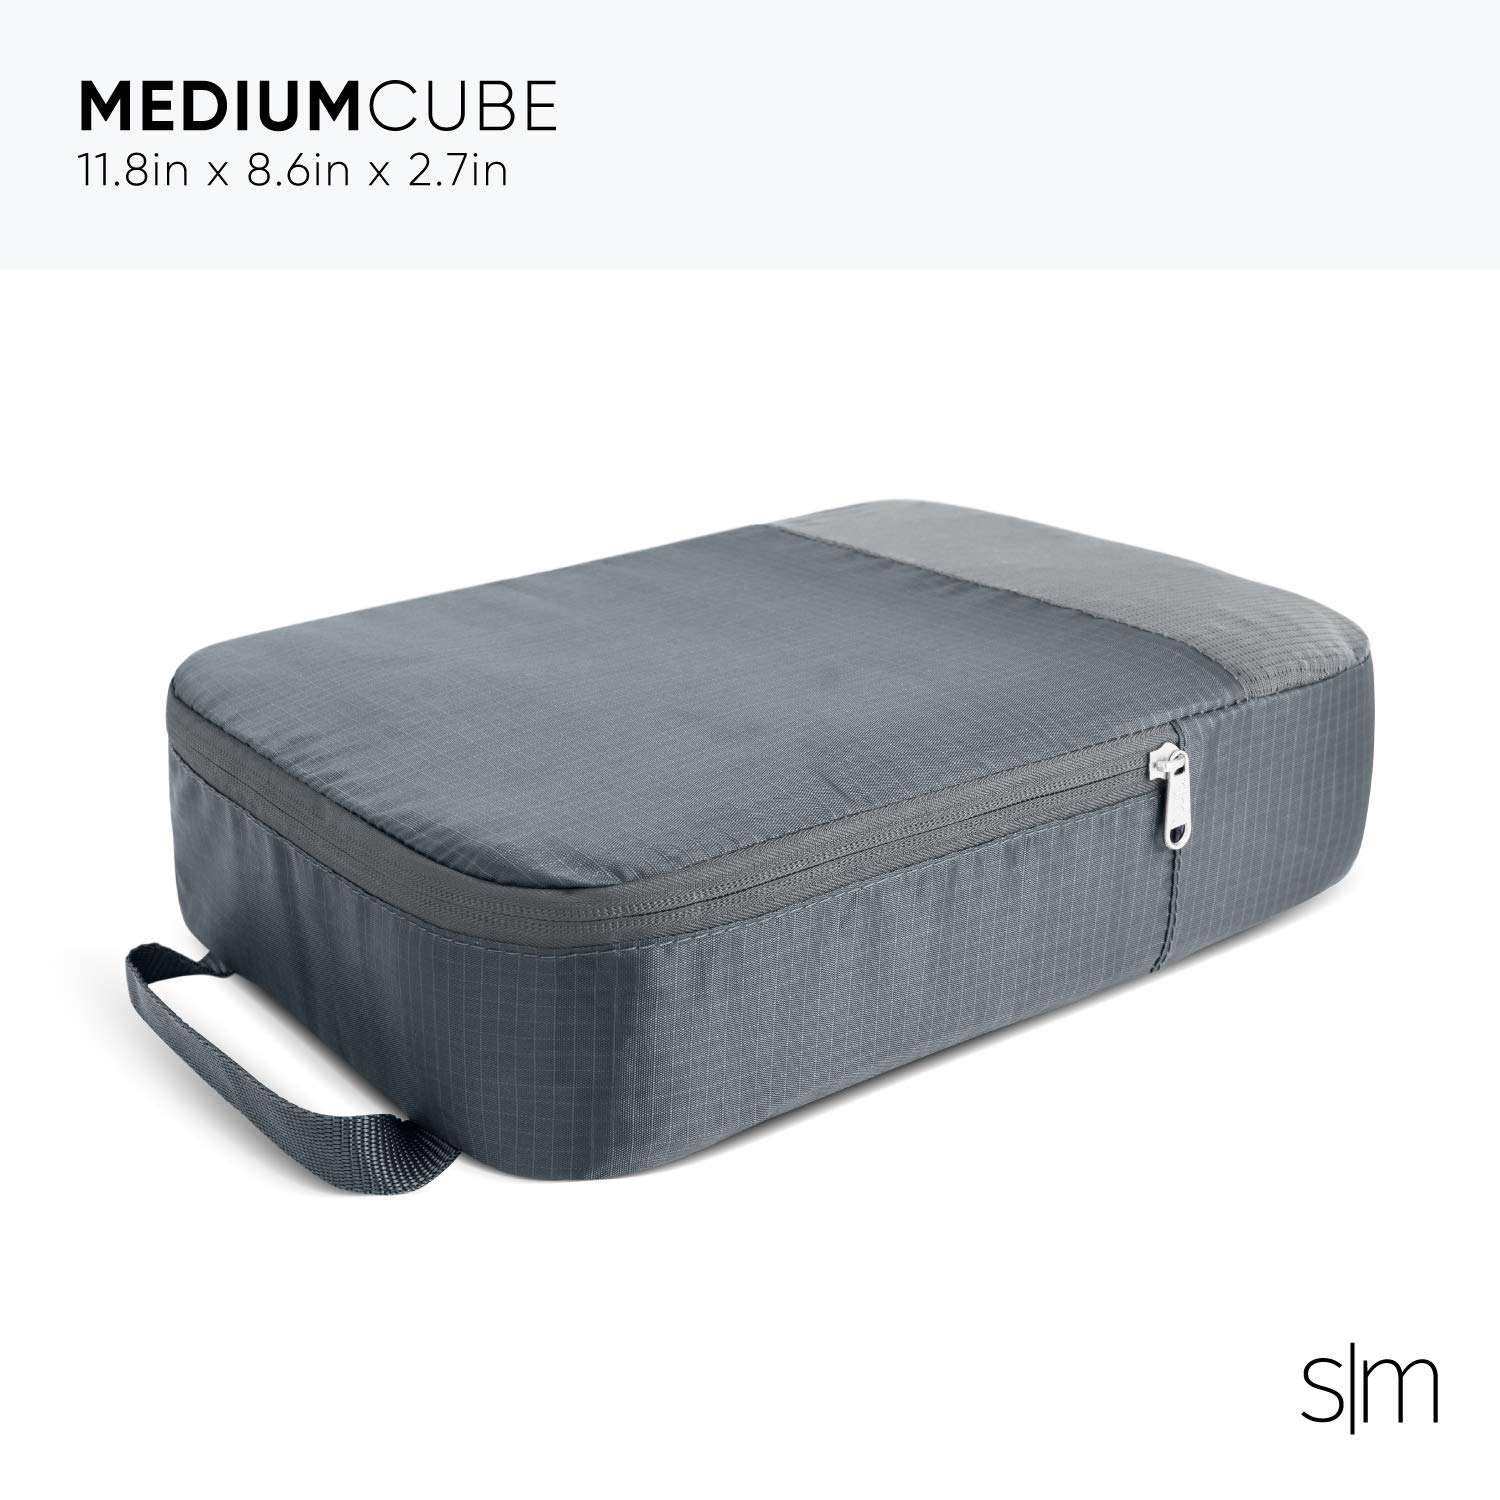 Travel Packing Cube Luggage Bag Product Details